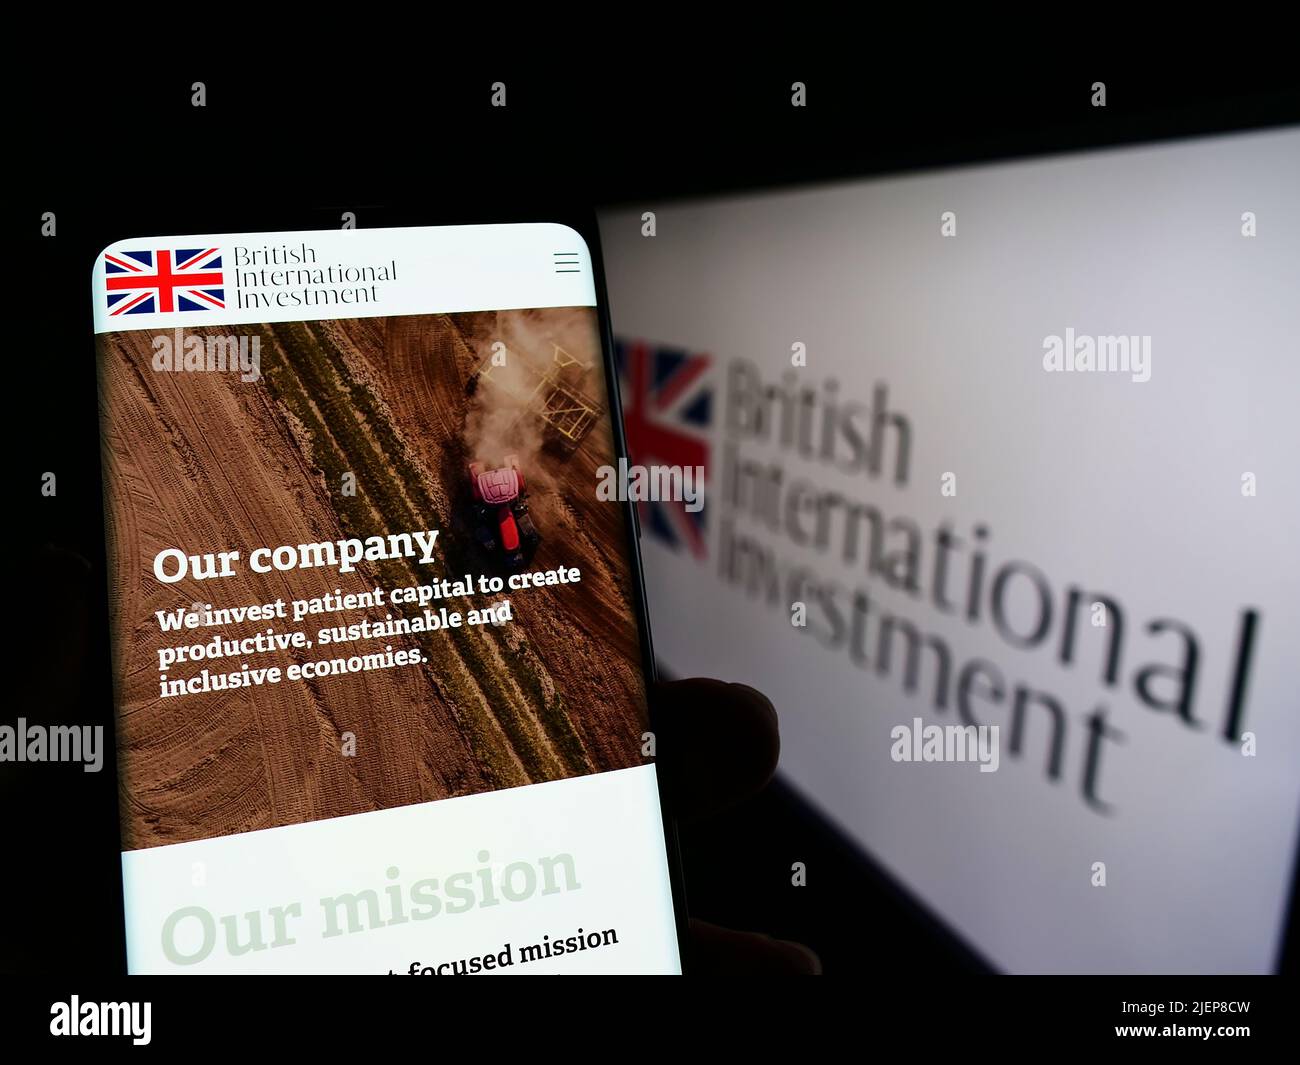 Person holding mobile phone with webpage of British International Investment (BII) on screen in front of logo. Focus on center of phone display. Stock Photo